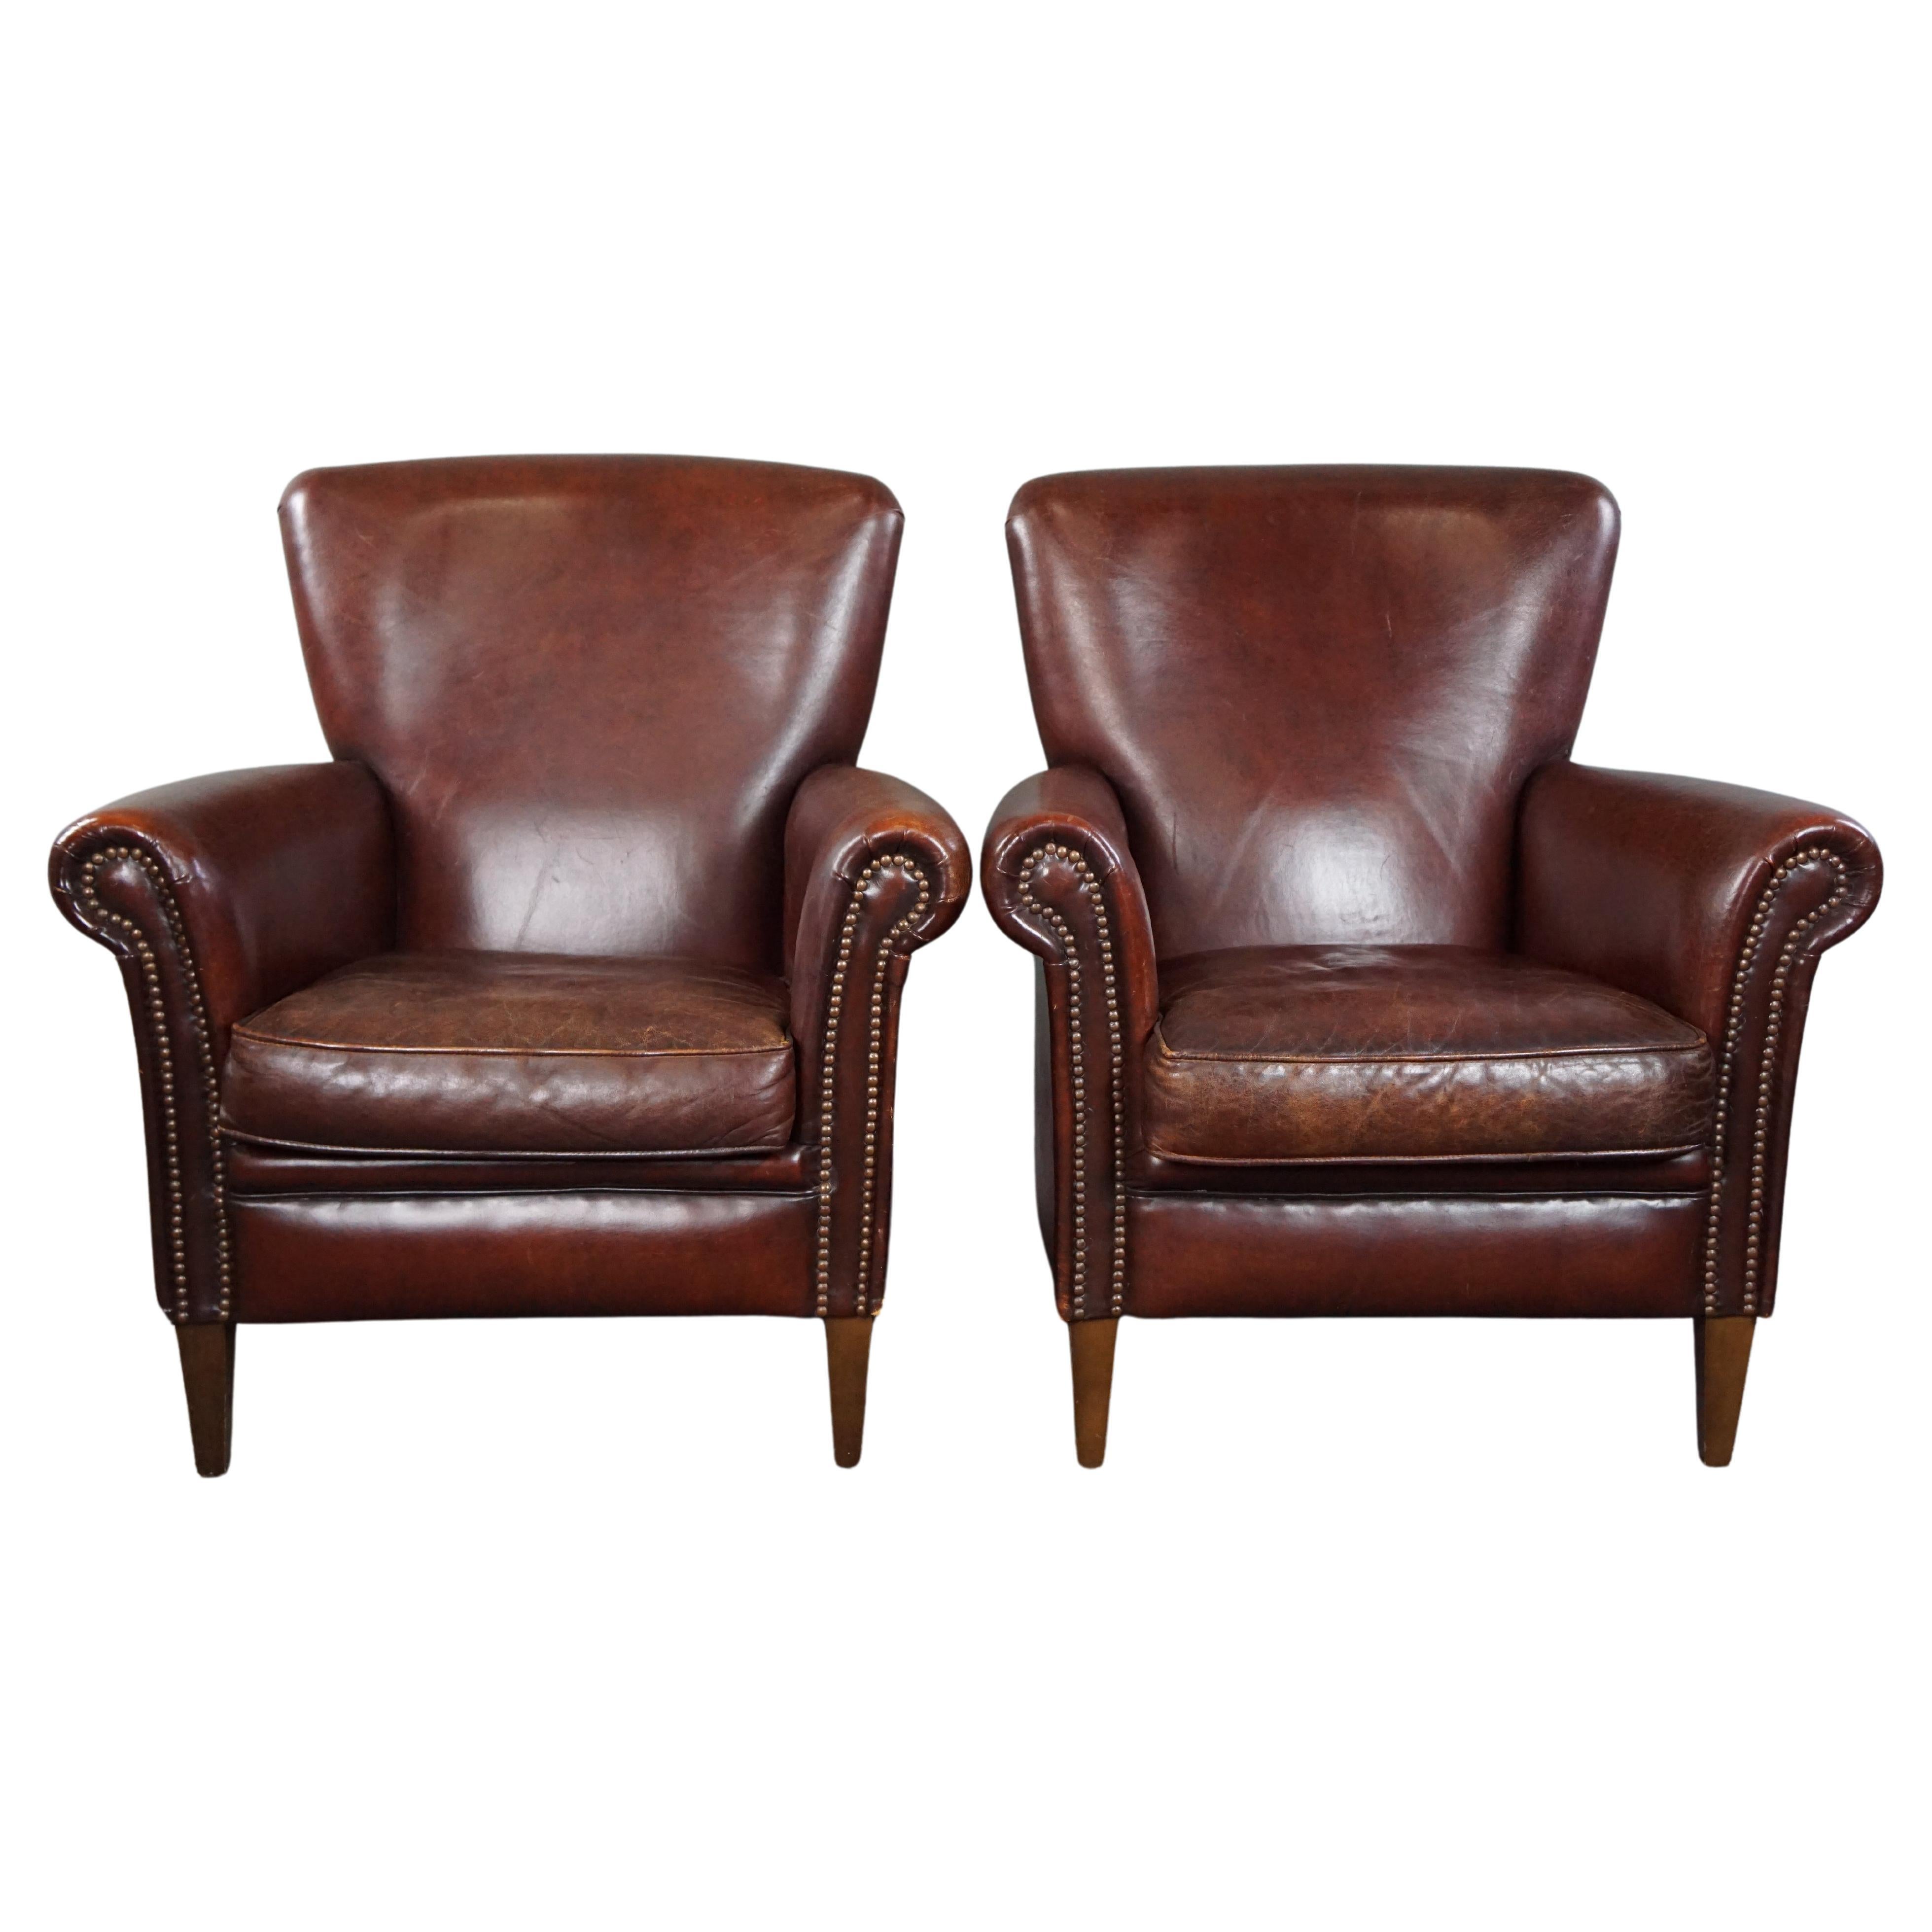 Set of two luxurious sheepskin armchairs with high backrest